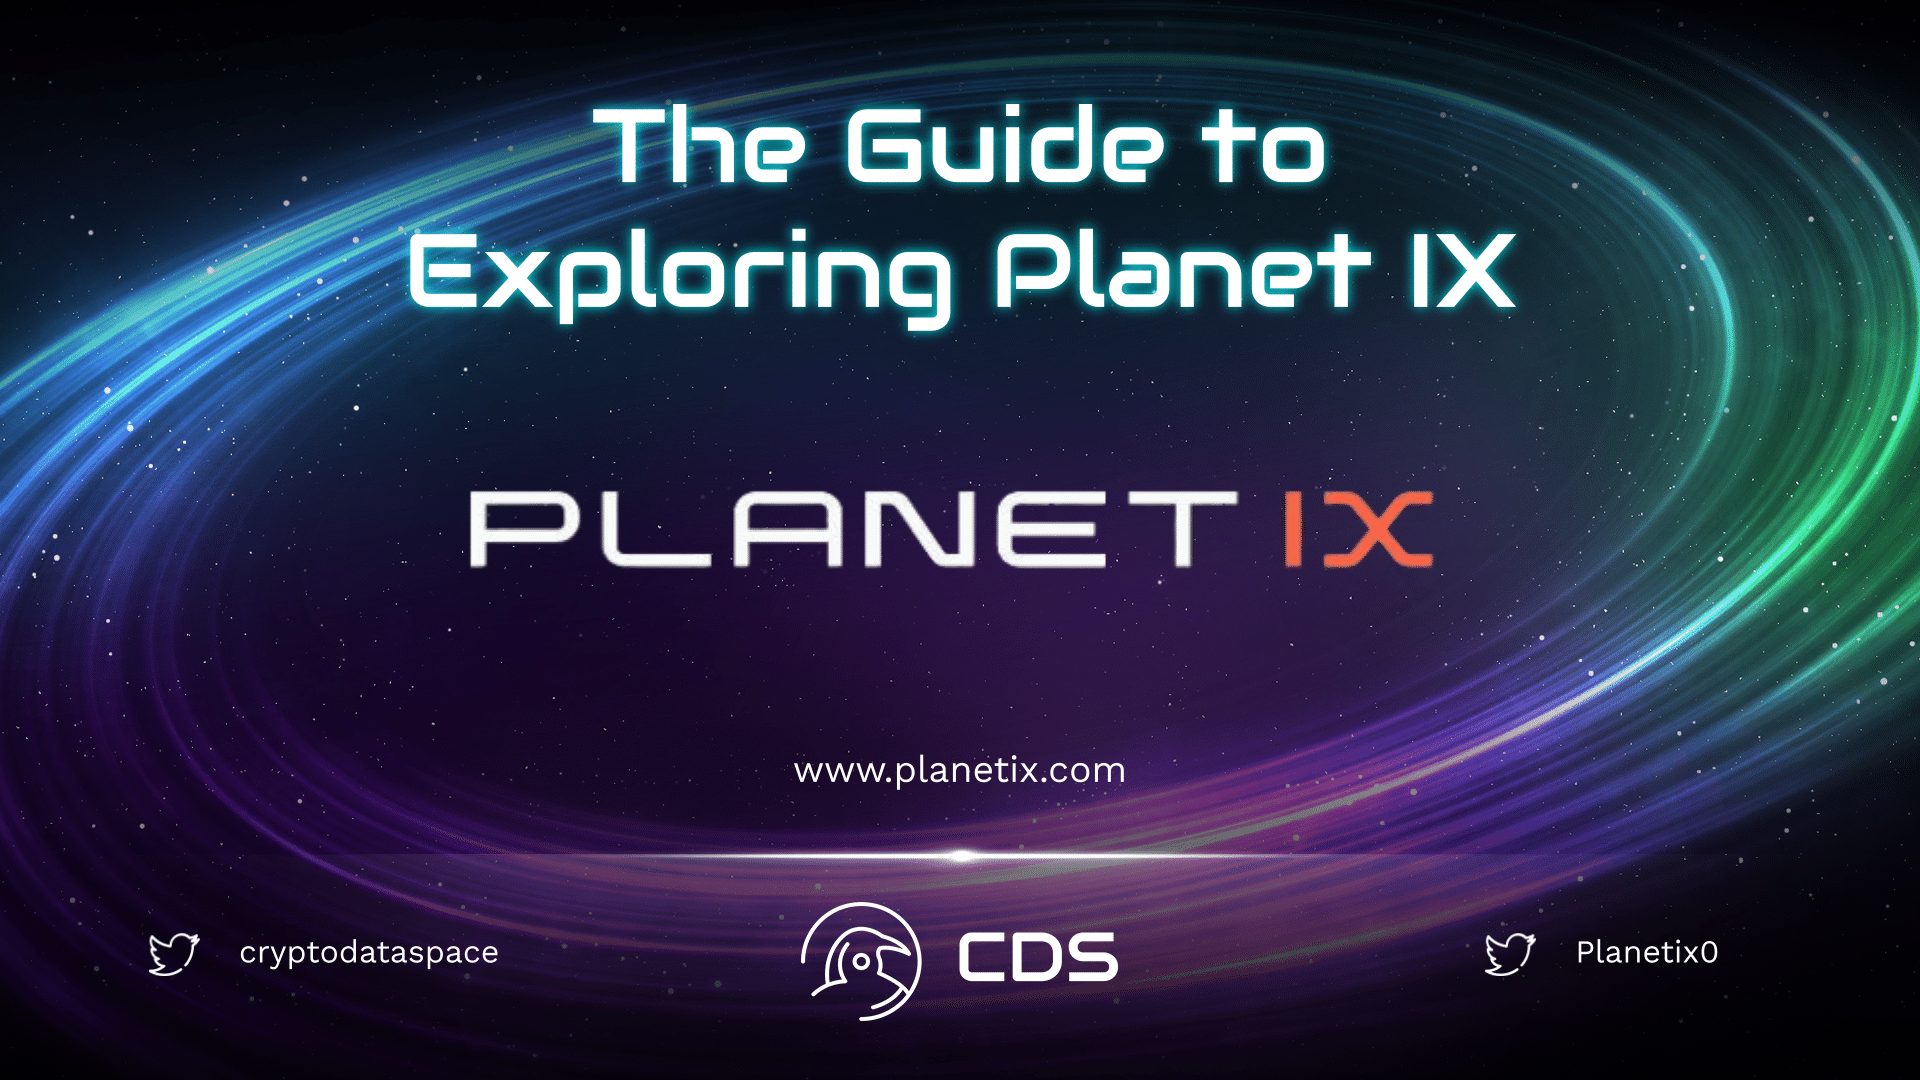 The Guide to Exploring Planet IX